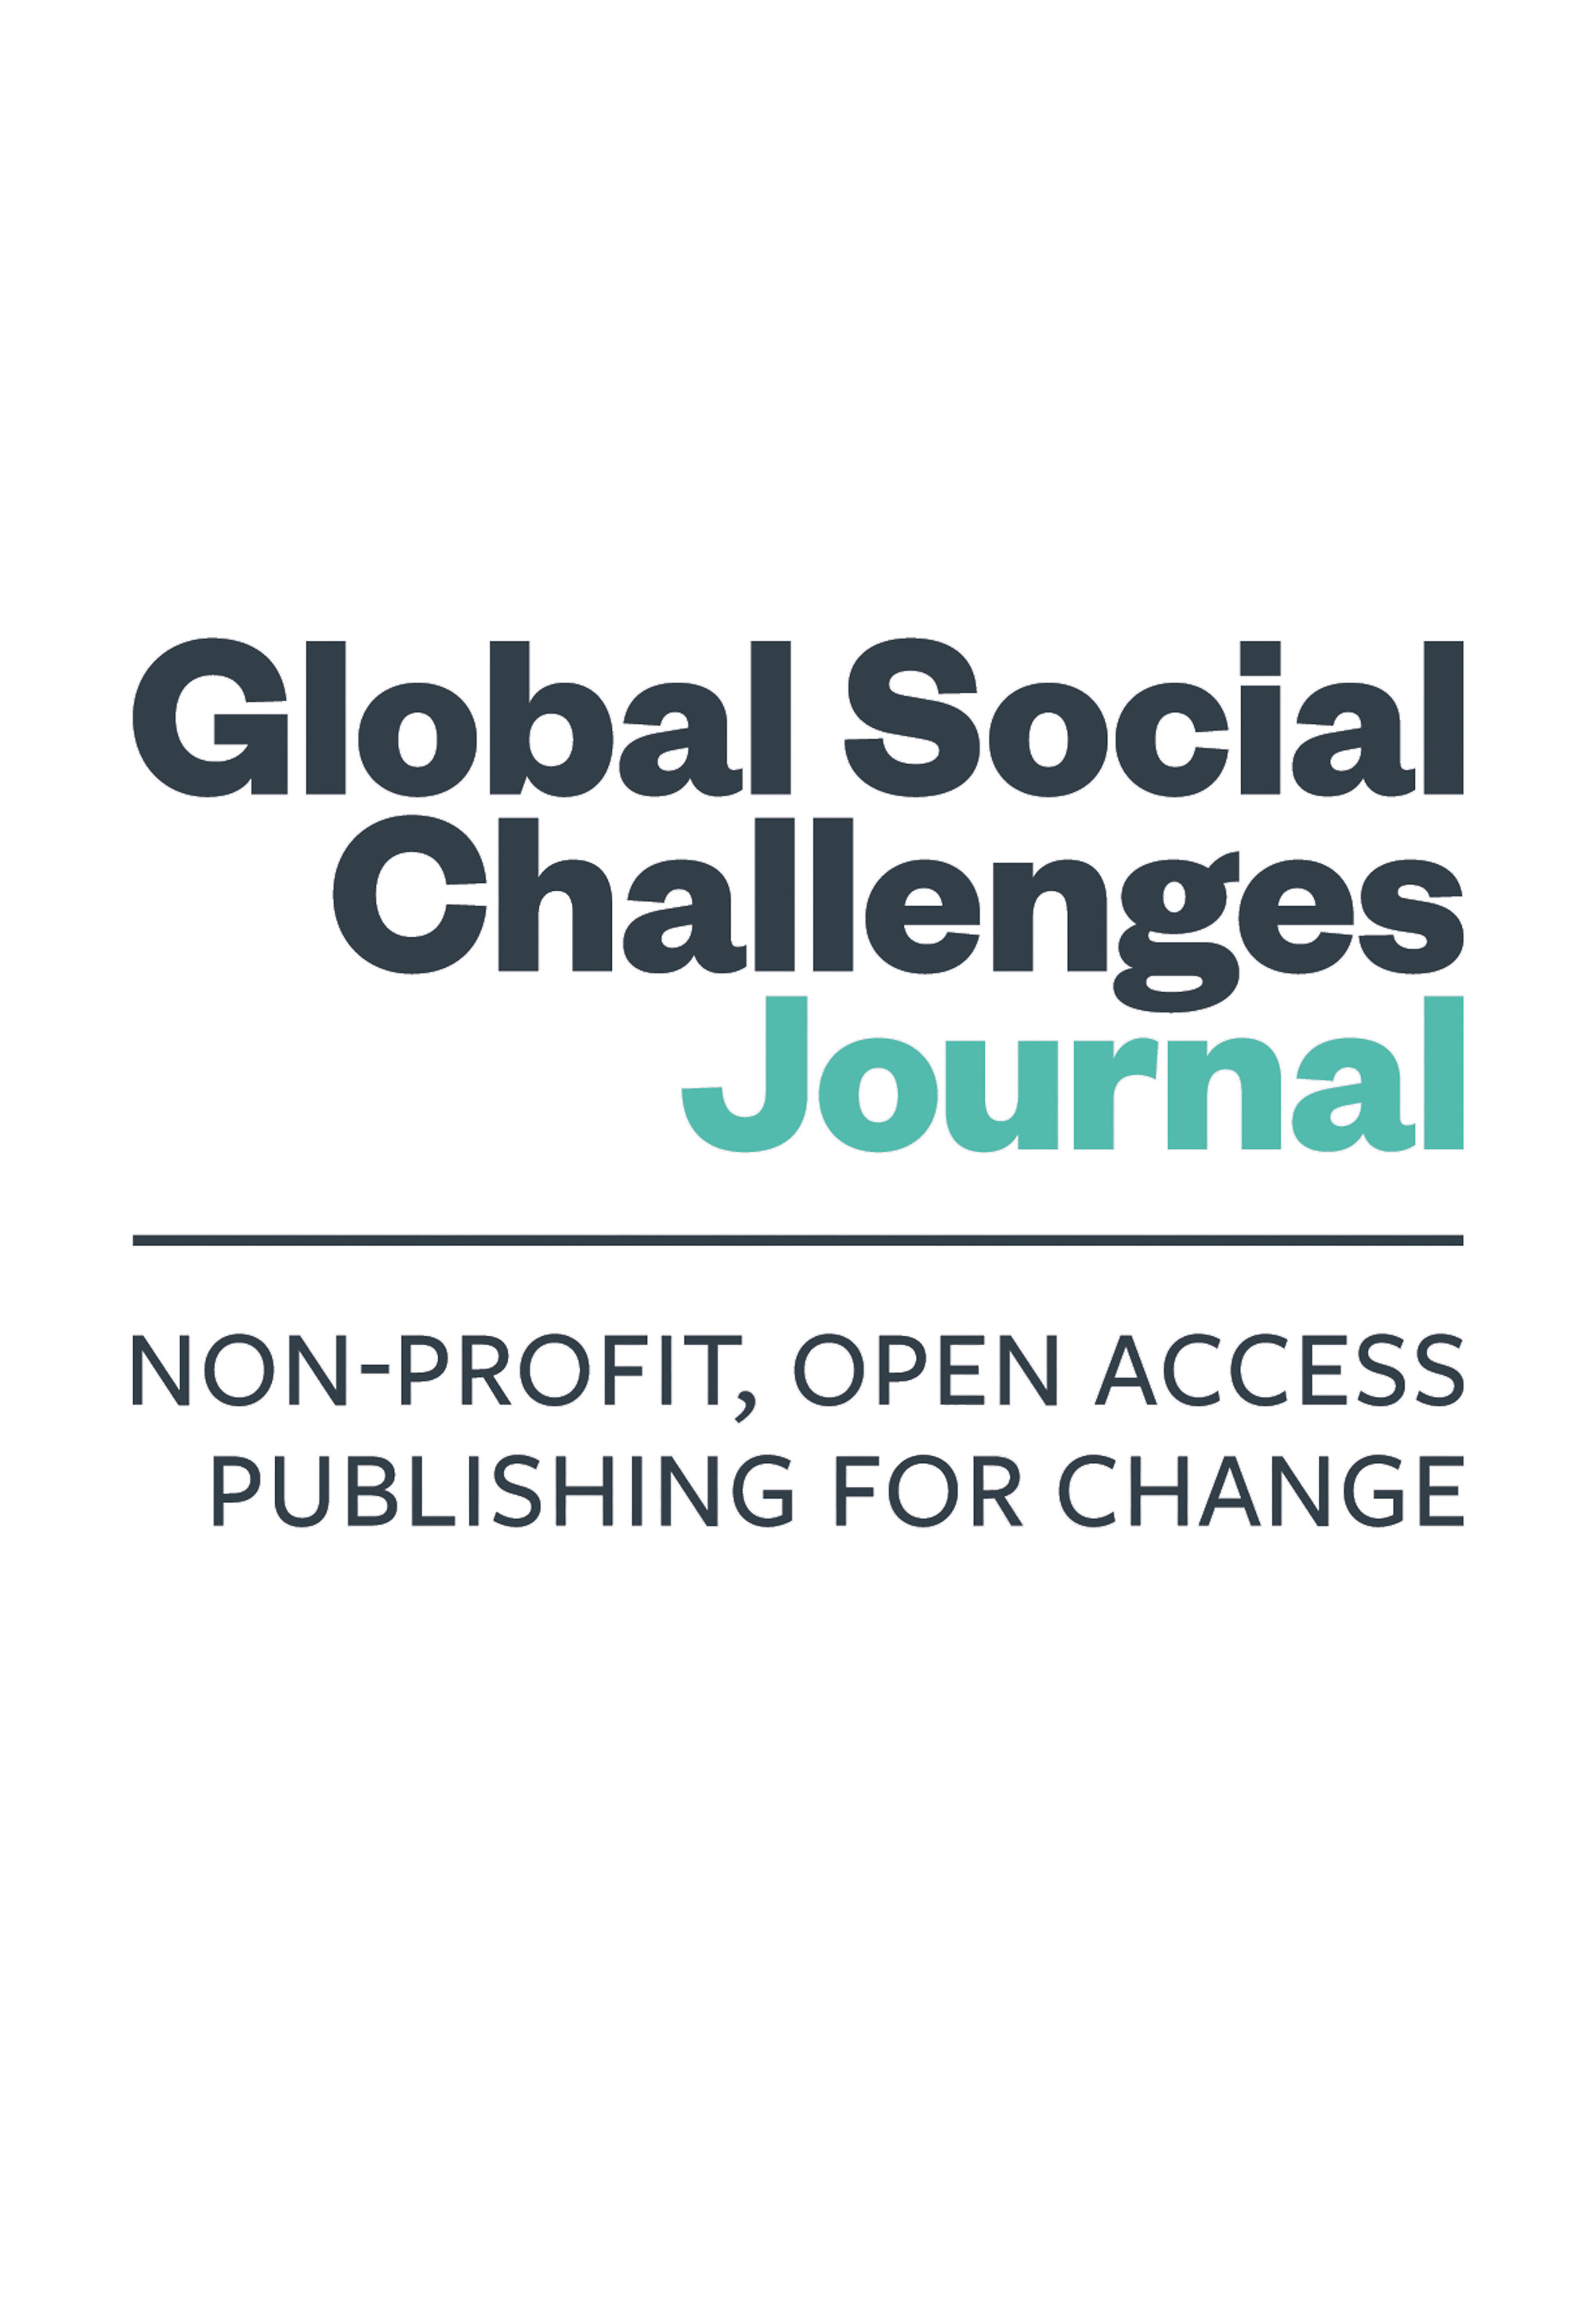 Global Social Challenges journal